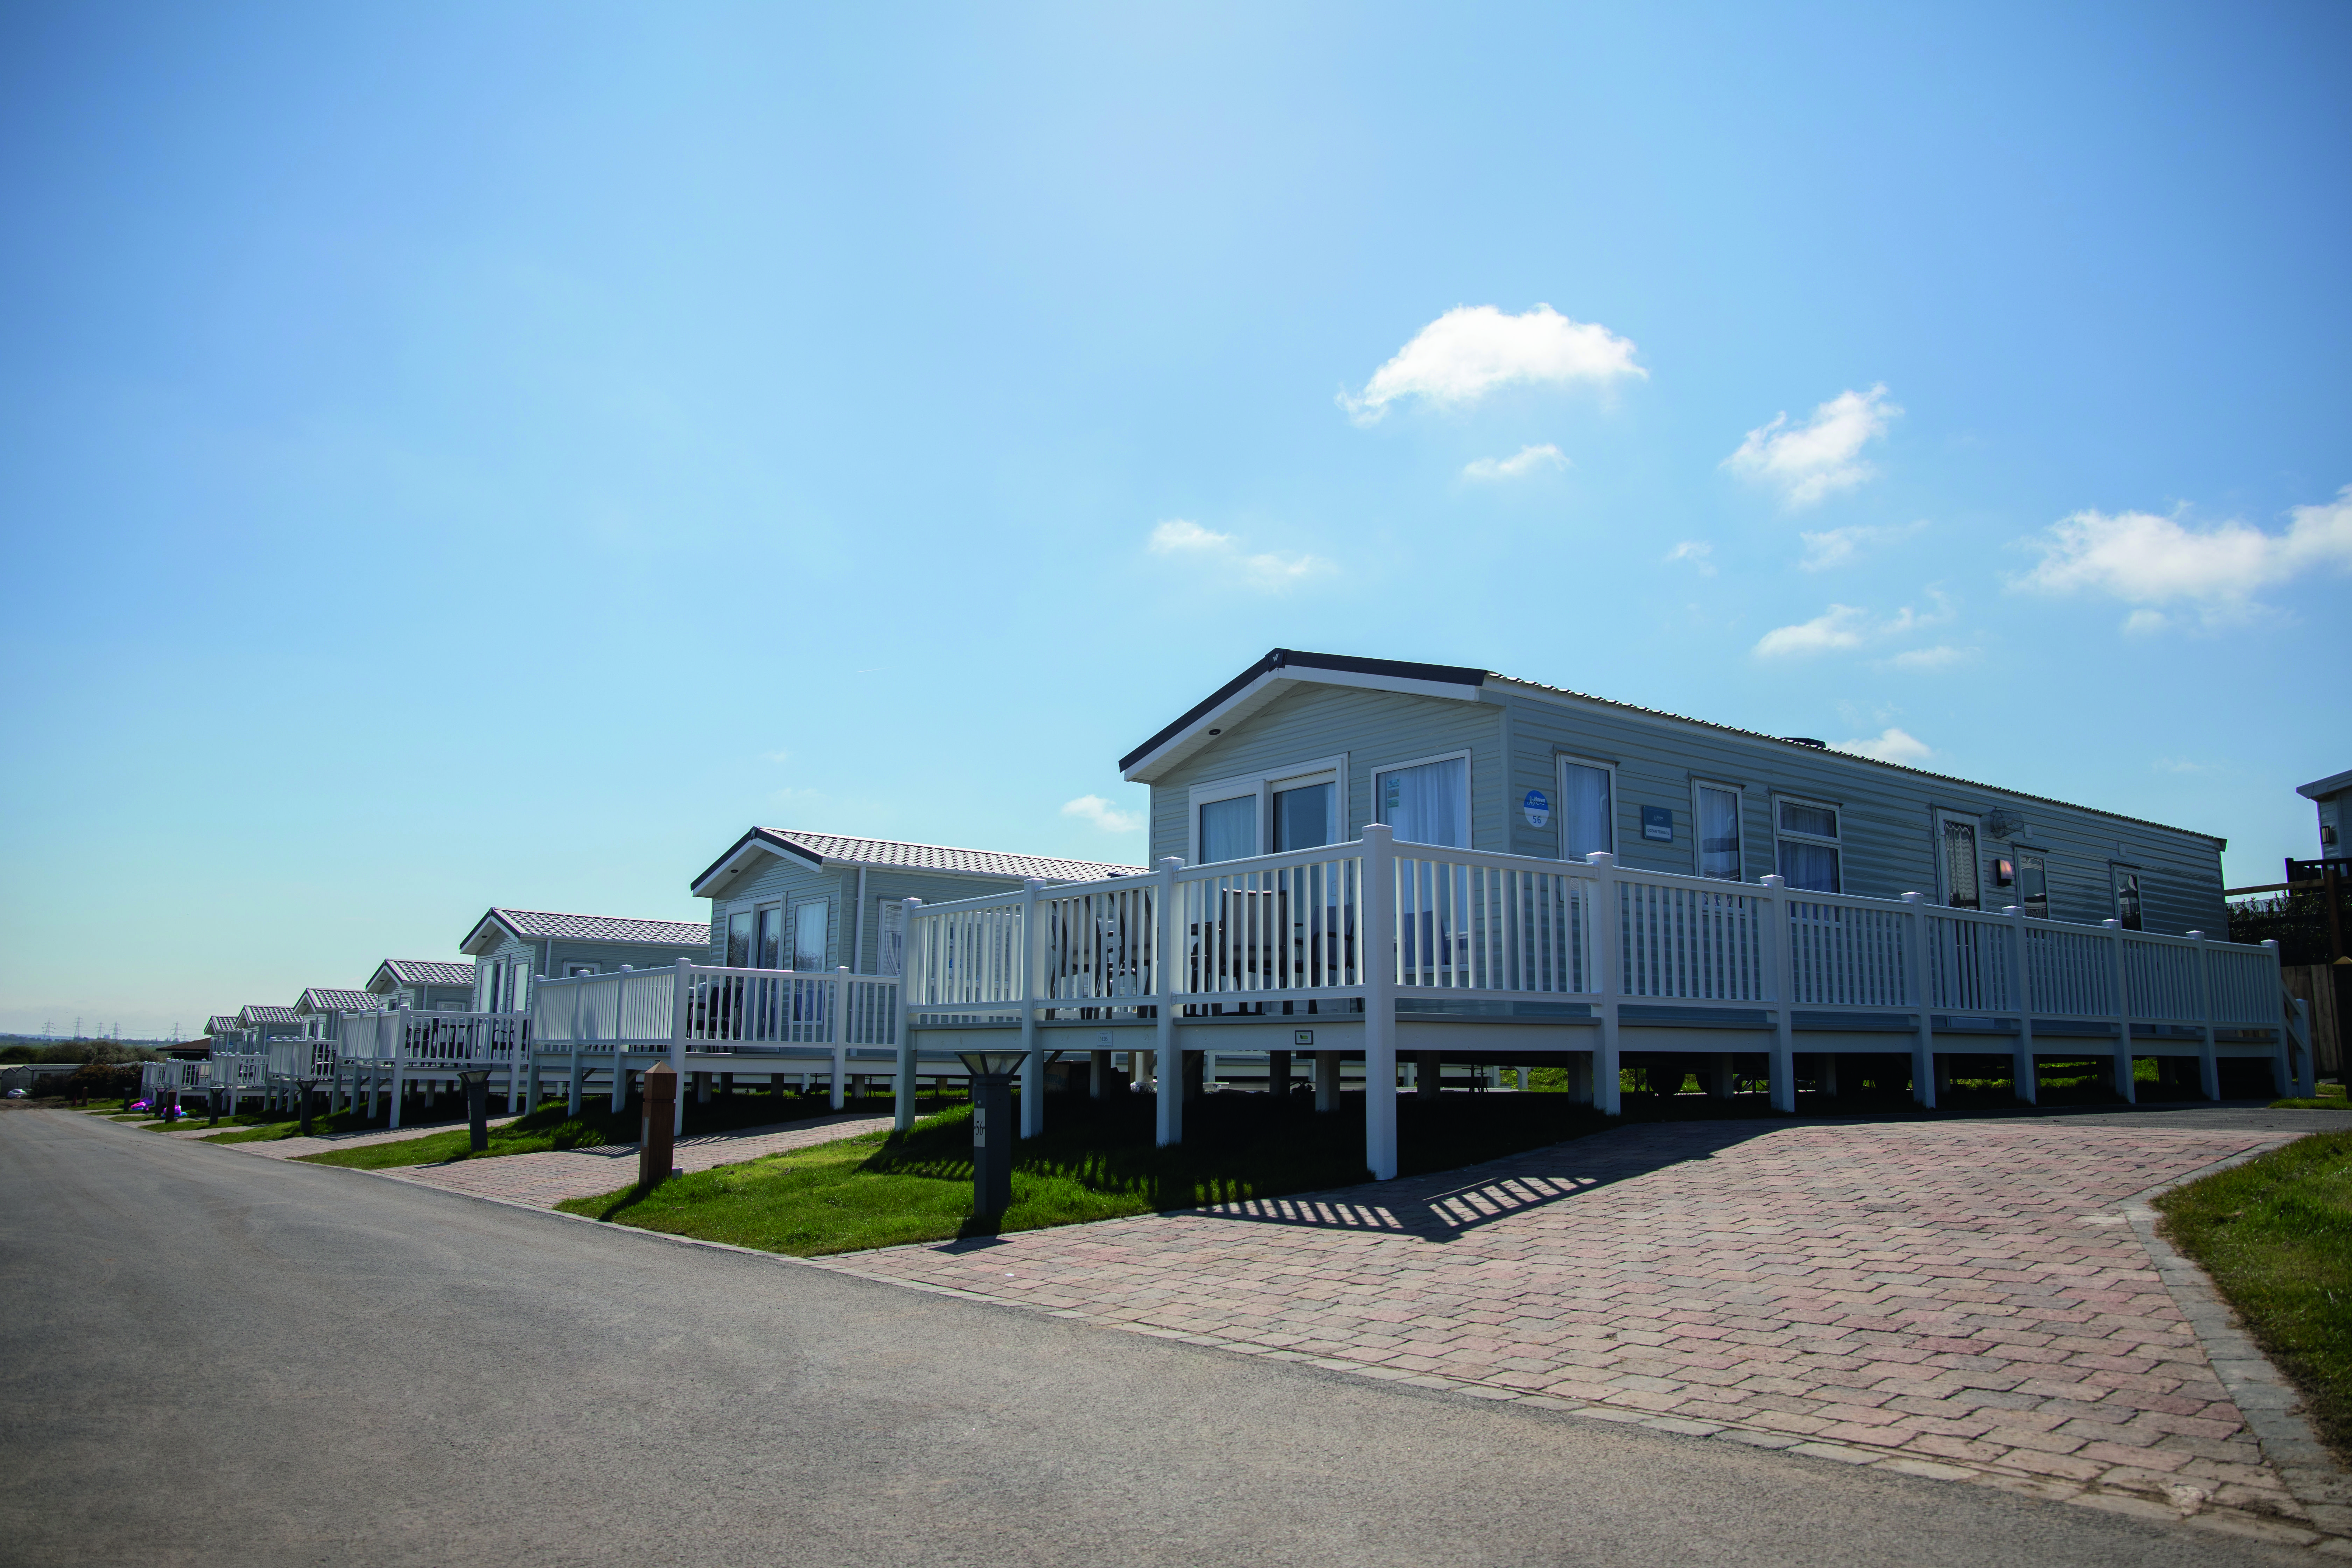 Caravan holidays start from £5.75pp a night for a family of four